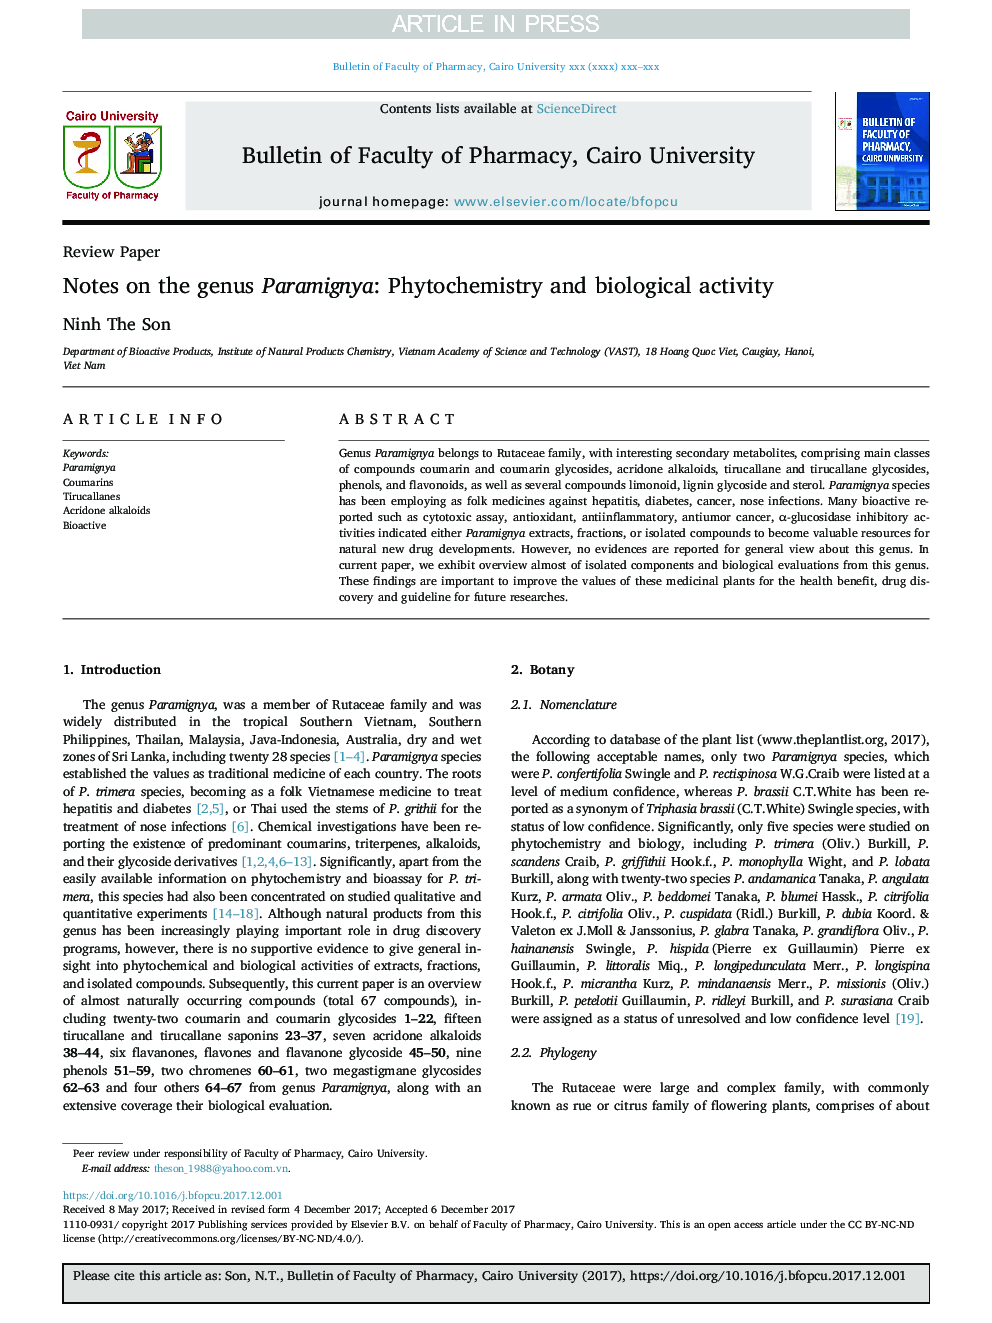 Notes on the genus Paramignya: Phytochemistry and biological activity